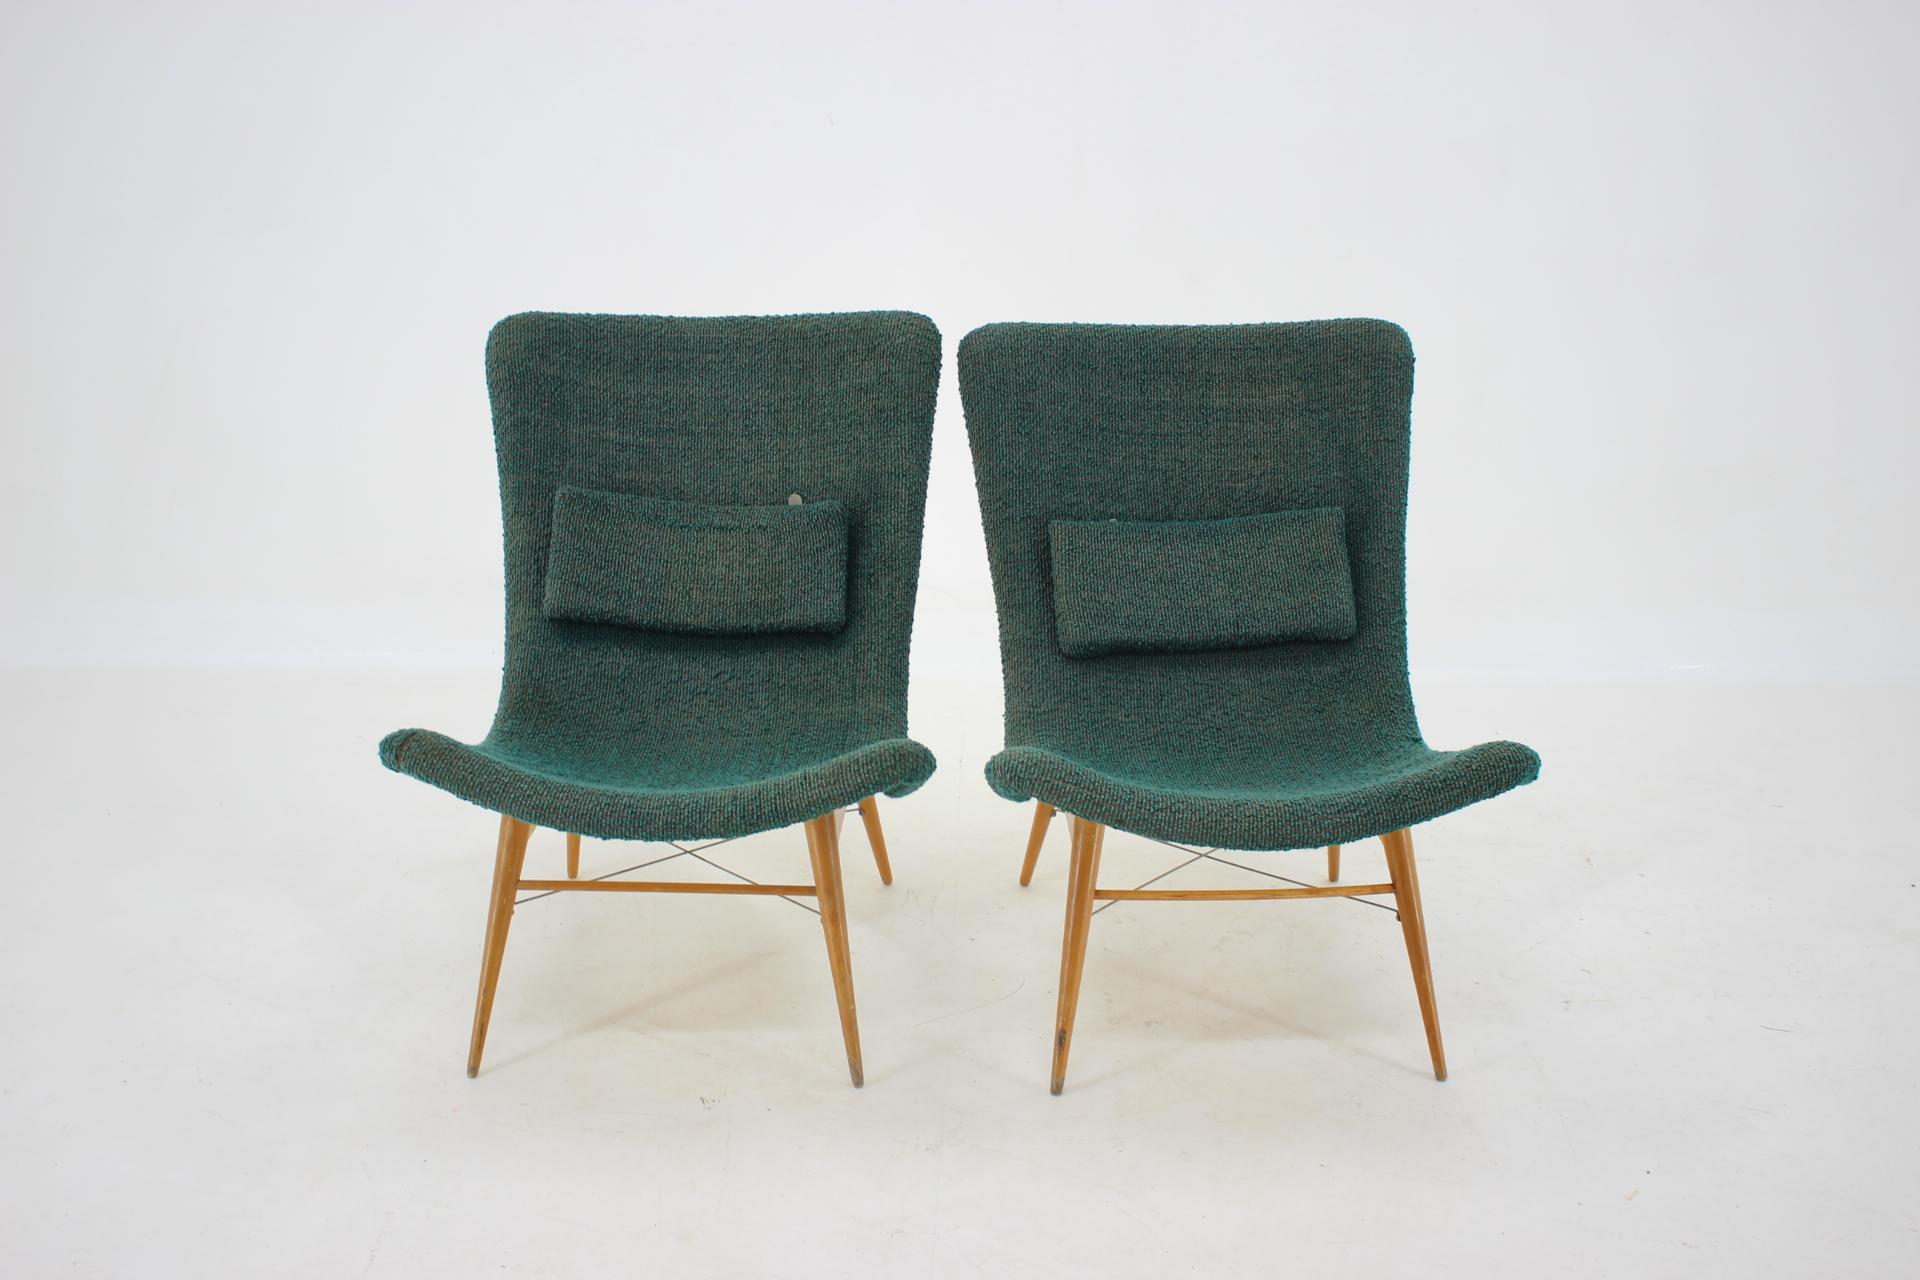 1960s Pair of Miroslav Navratil Shell Lounge Chairs, Czechoslovakia In Good Condition For Sale In Praha, CZ